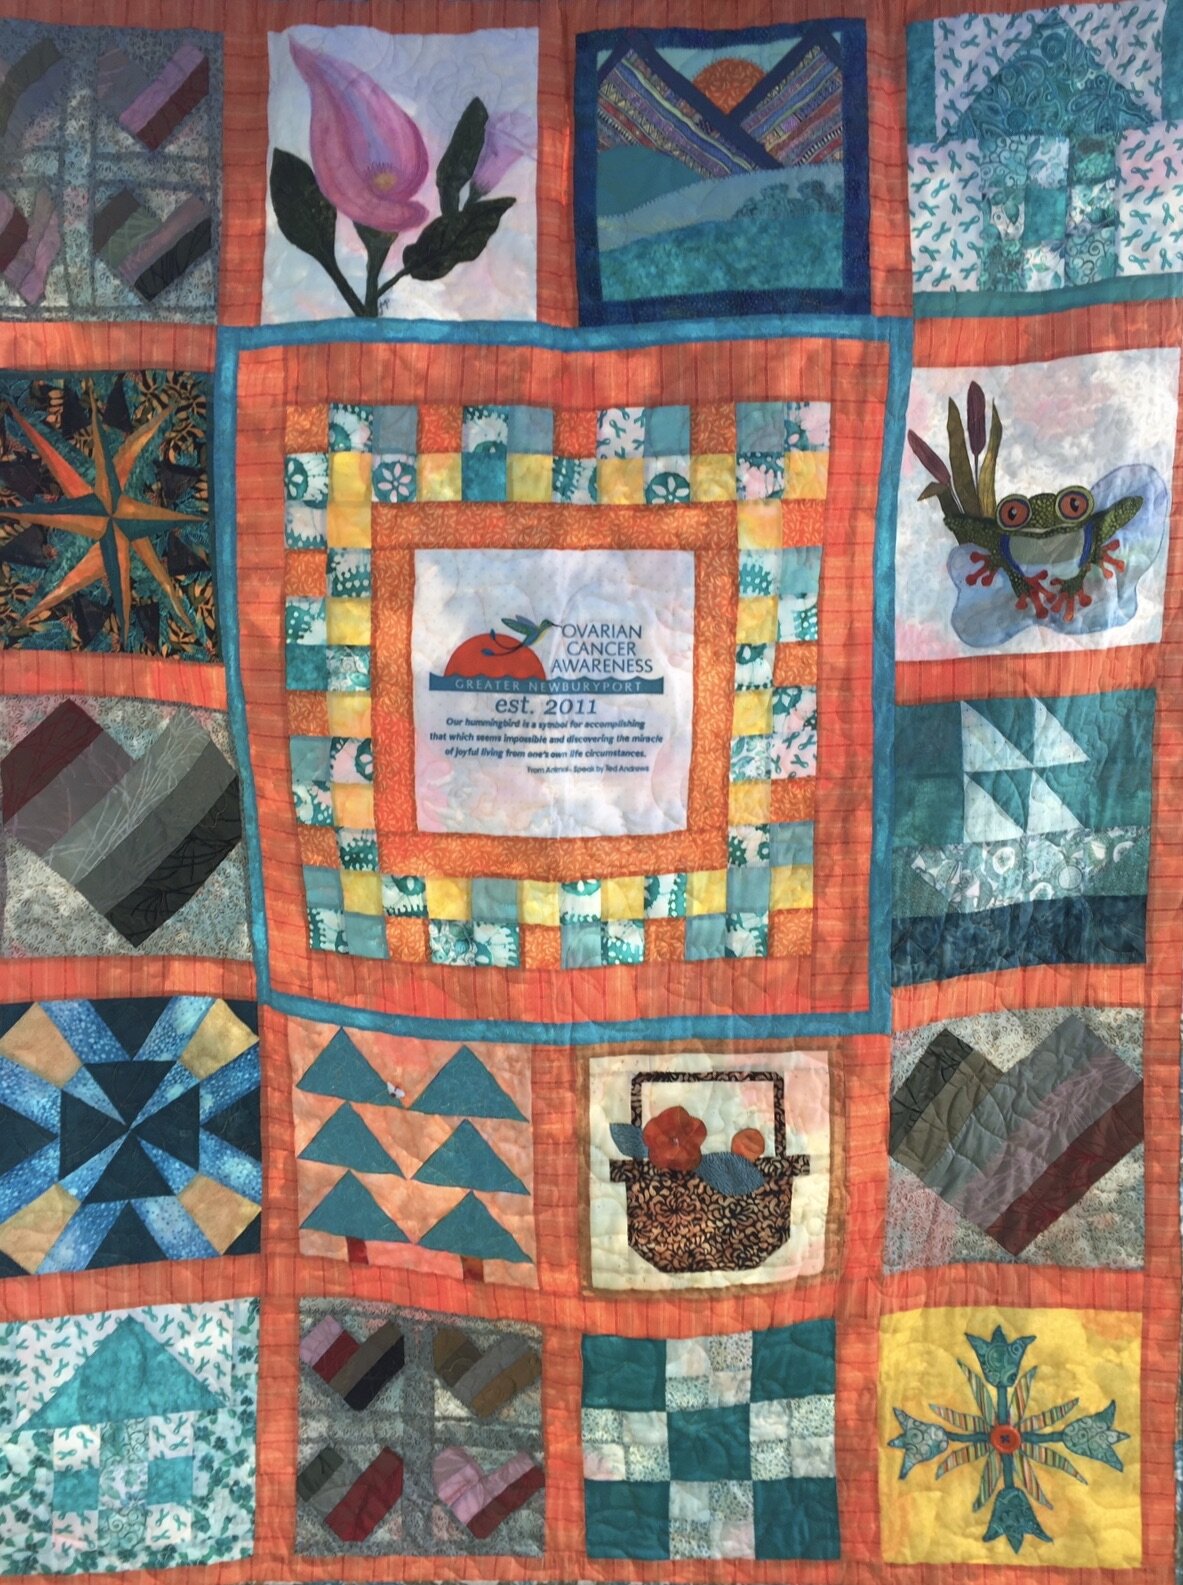 Ovarian cancer quilt project. Intraductal papilloma duct ectasia